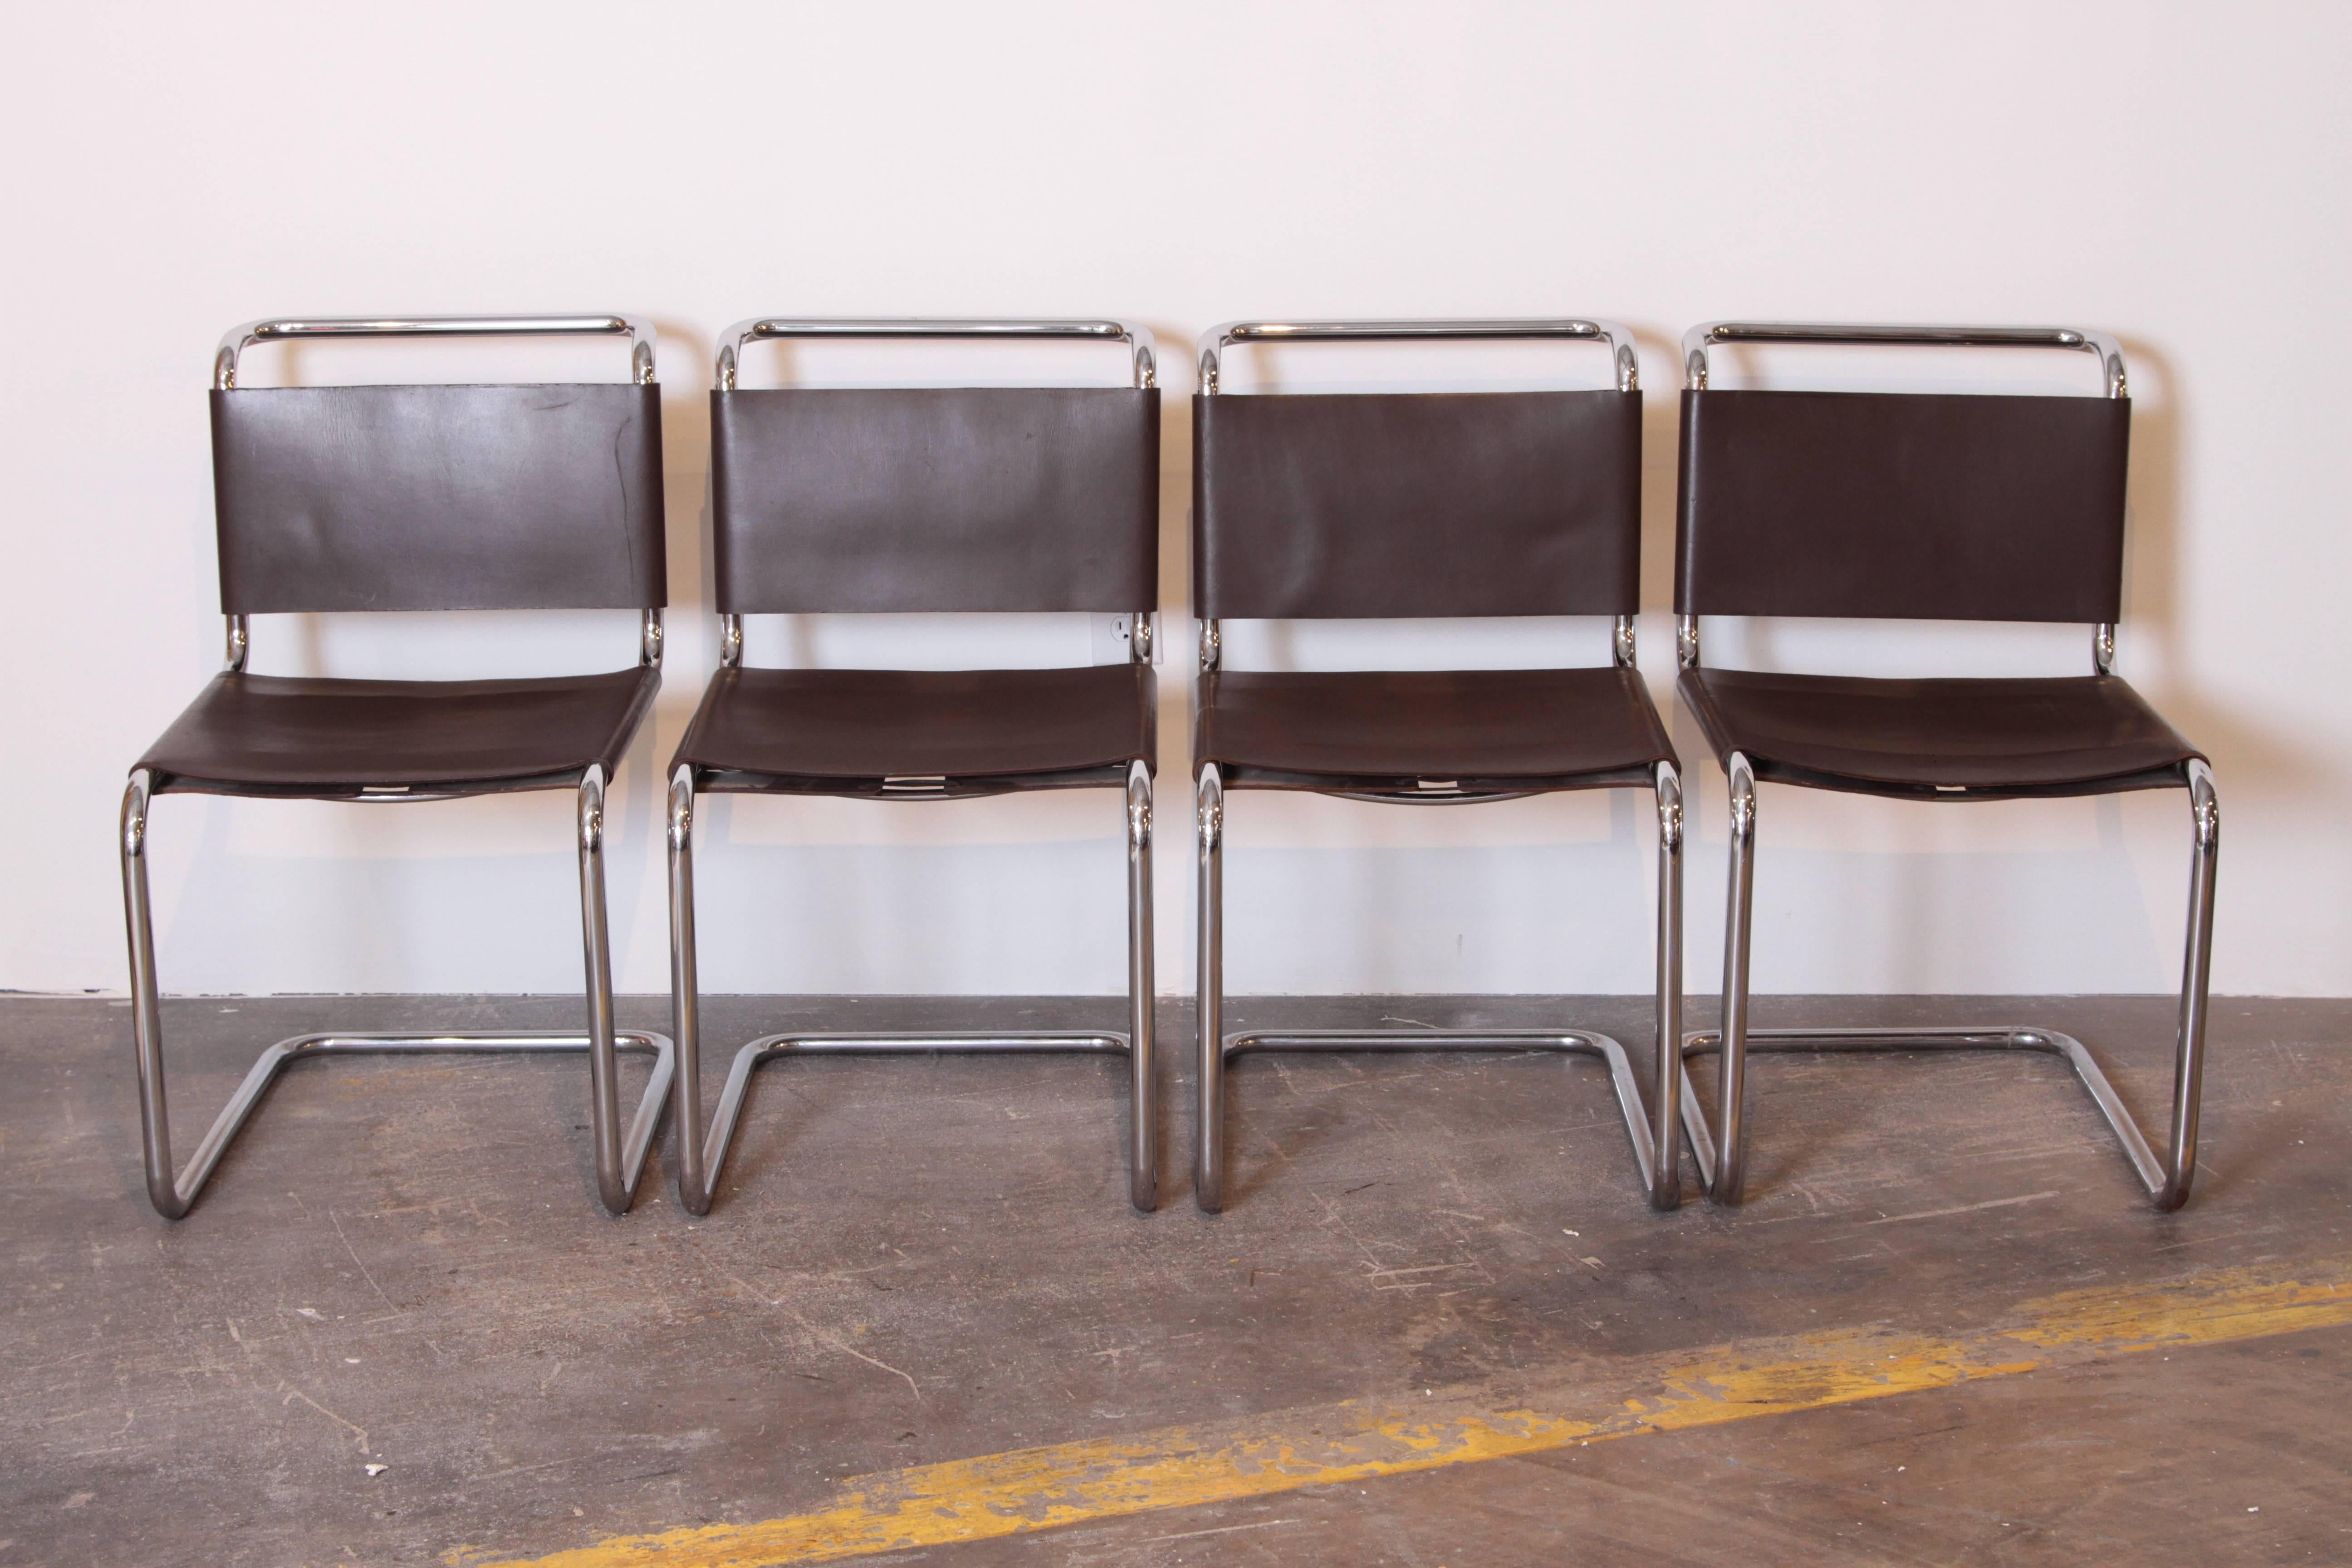 1978 Knoll Spoleto Mid Century Side Chairs by Ufficio Tecnico  Set of Four 

Classic compact design introduced in 1971 by Knoll's In-House Design team (U-T).
Winner of multiple period design awards, as a more functional version of earlier Mies, Stam